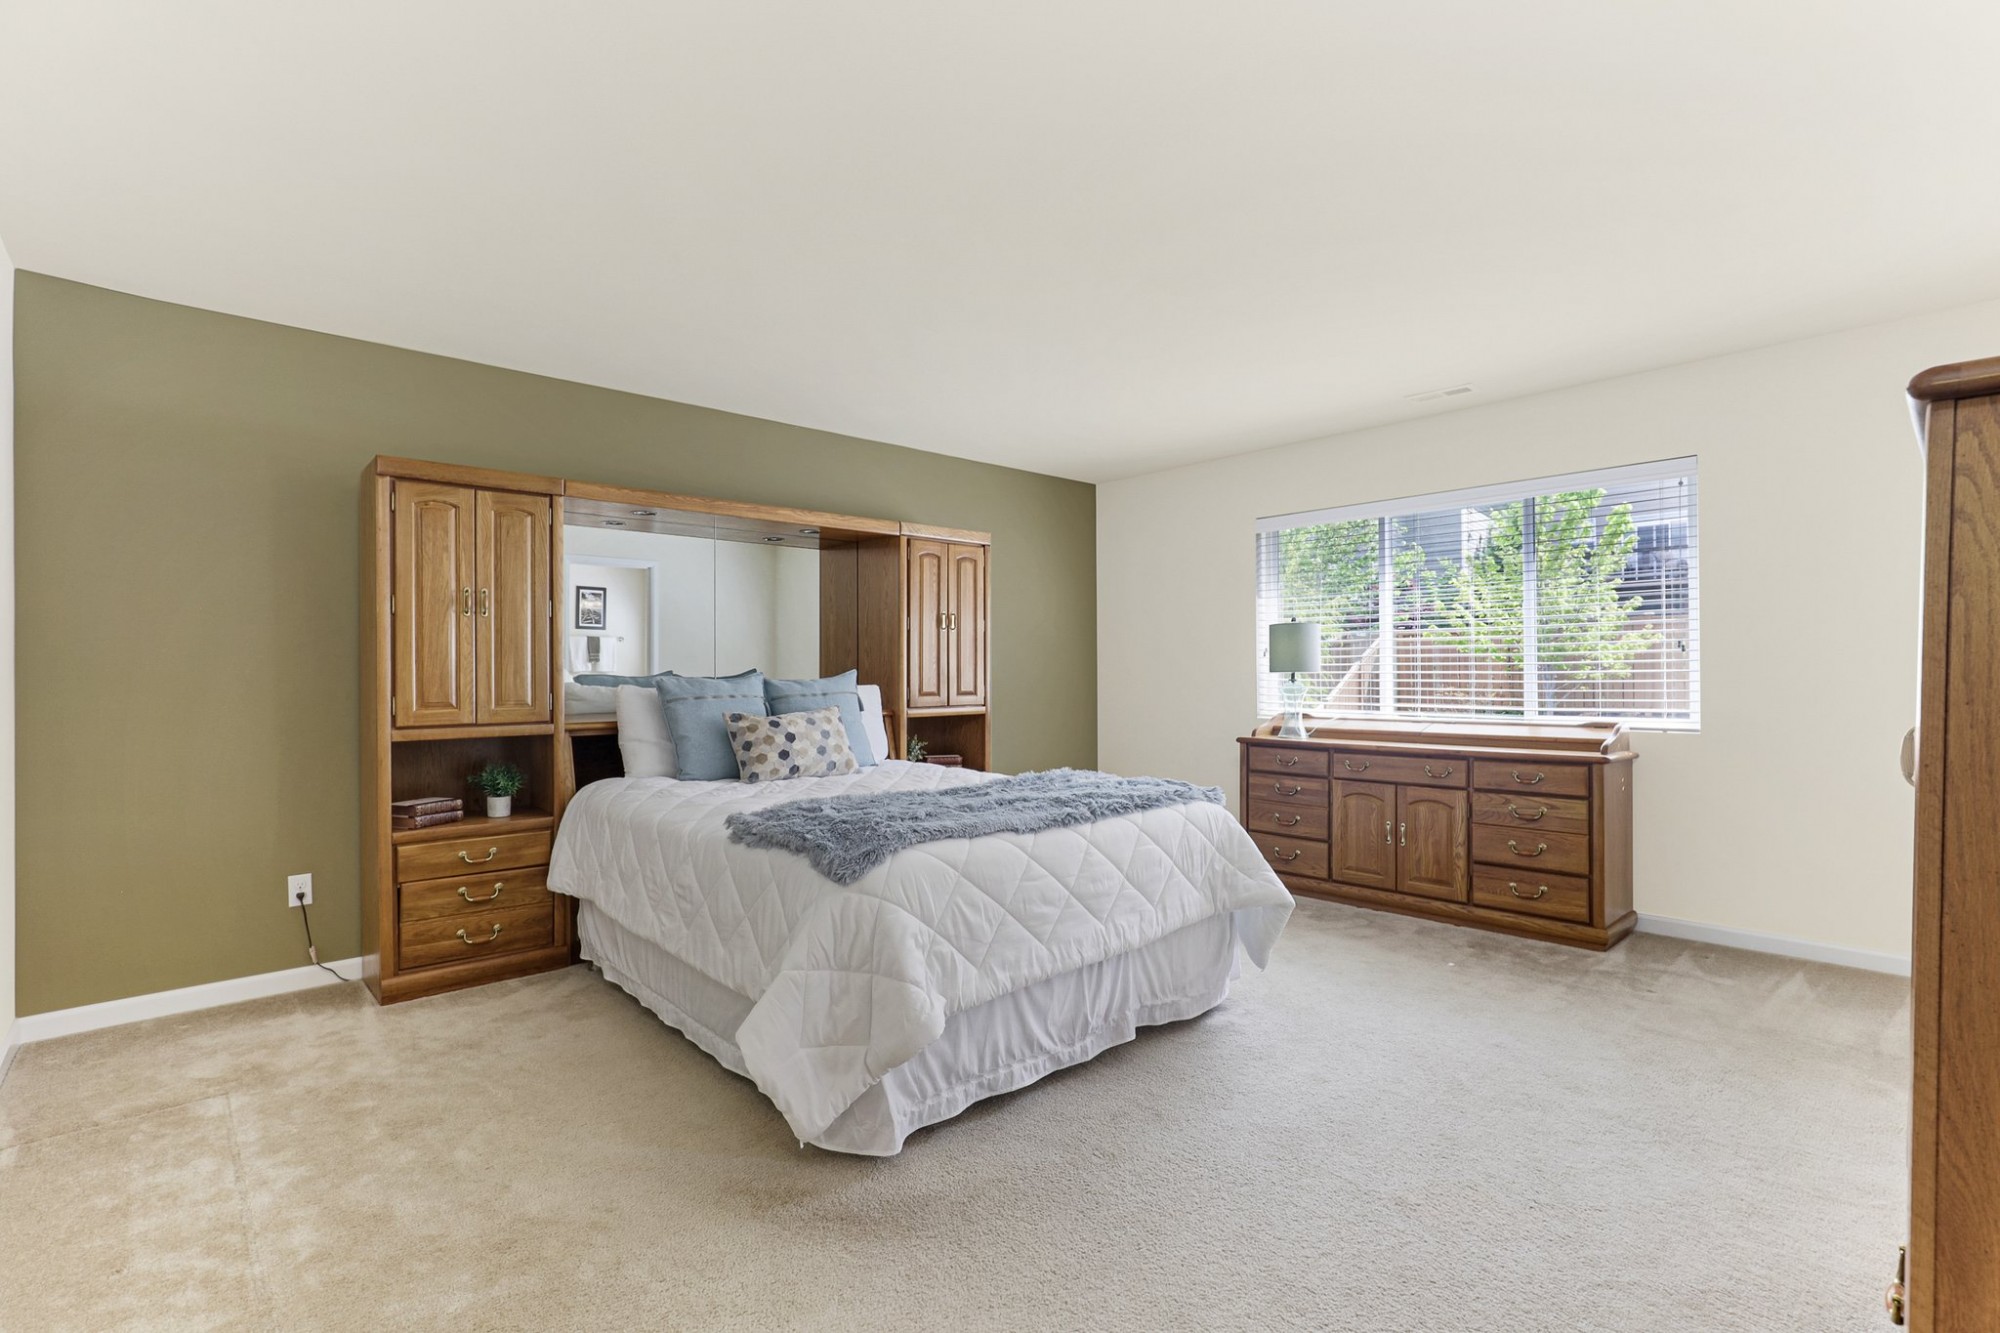 Spacious Master Bedroom will accommodate the largest furniture!